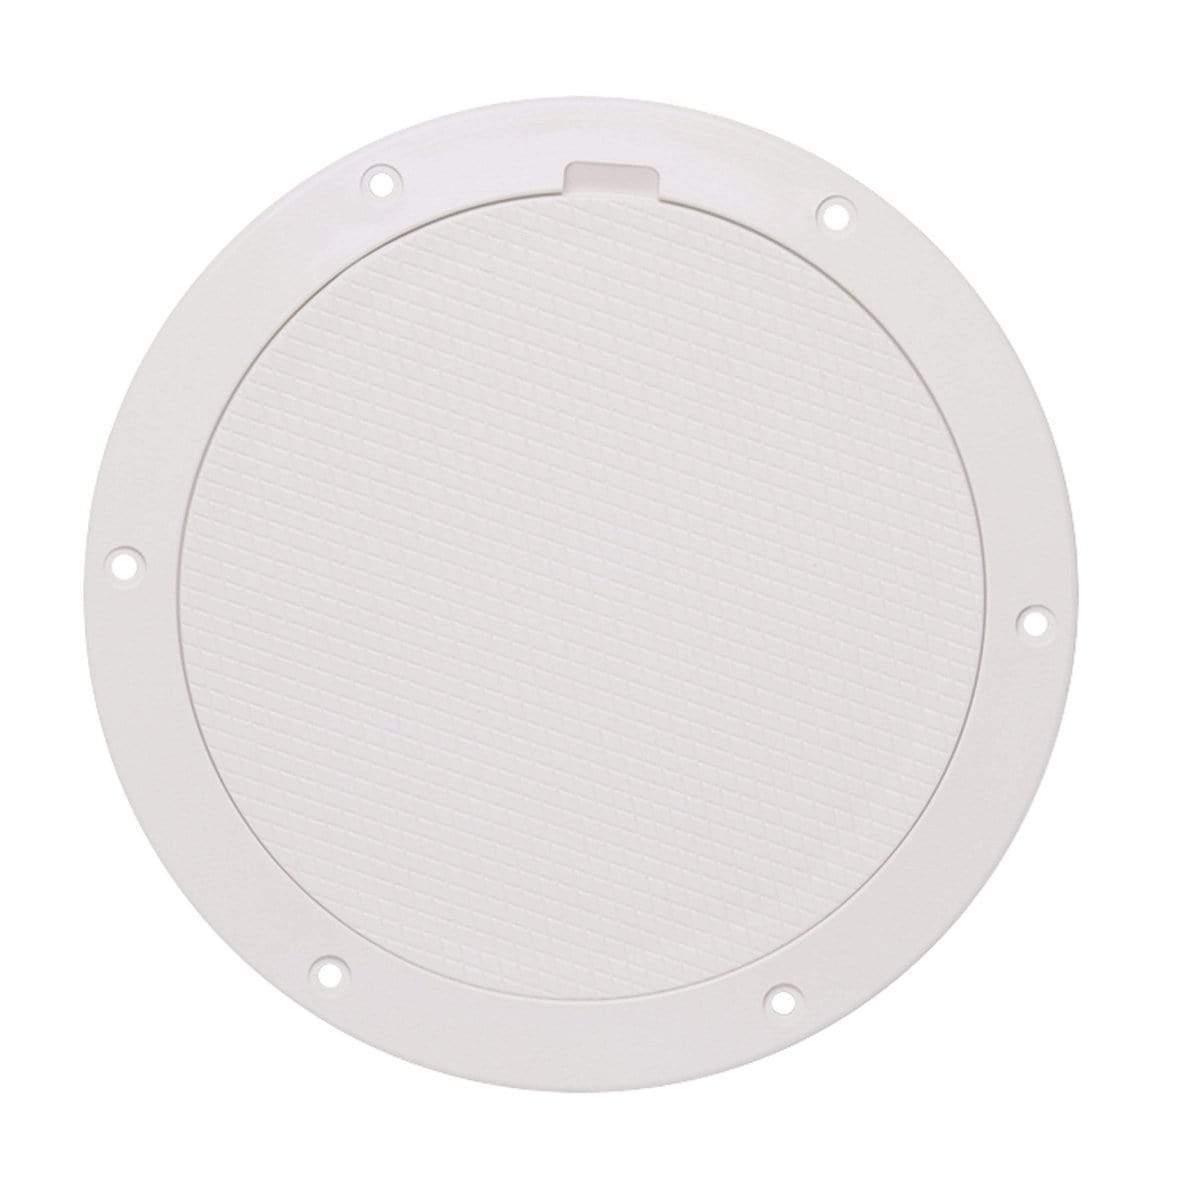 Beckson Marine Qualifies for Free Shipping Beckson Pry-Out Deck Plate 6" with Diamond Center White #DP65-W